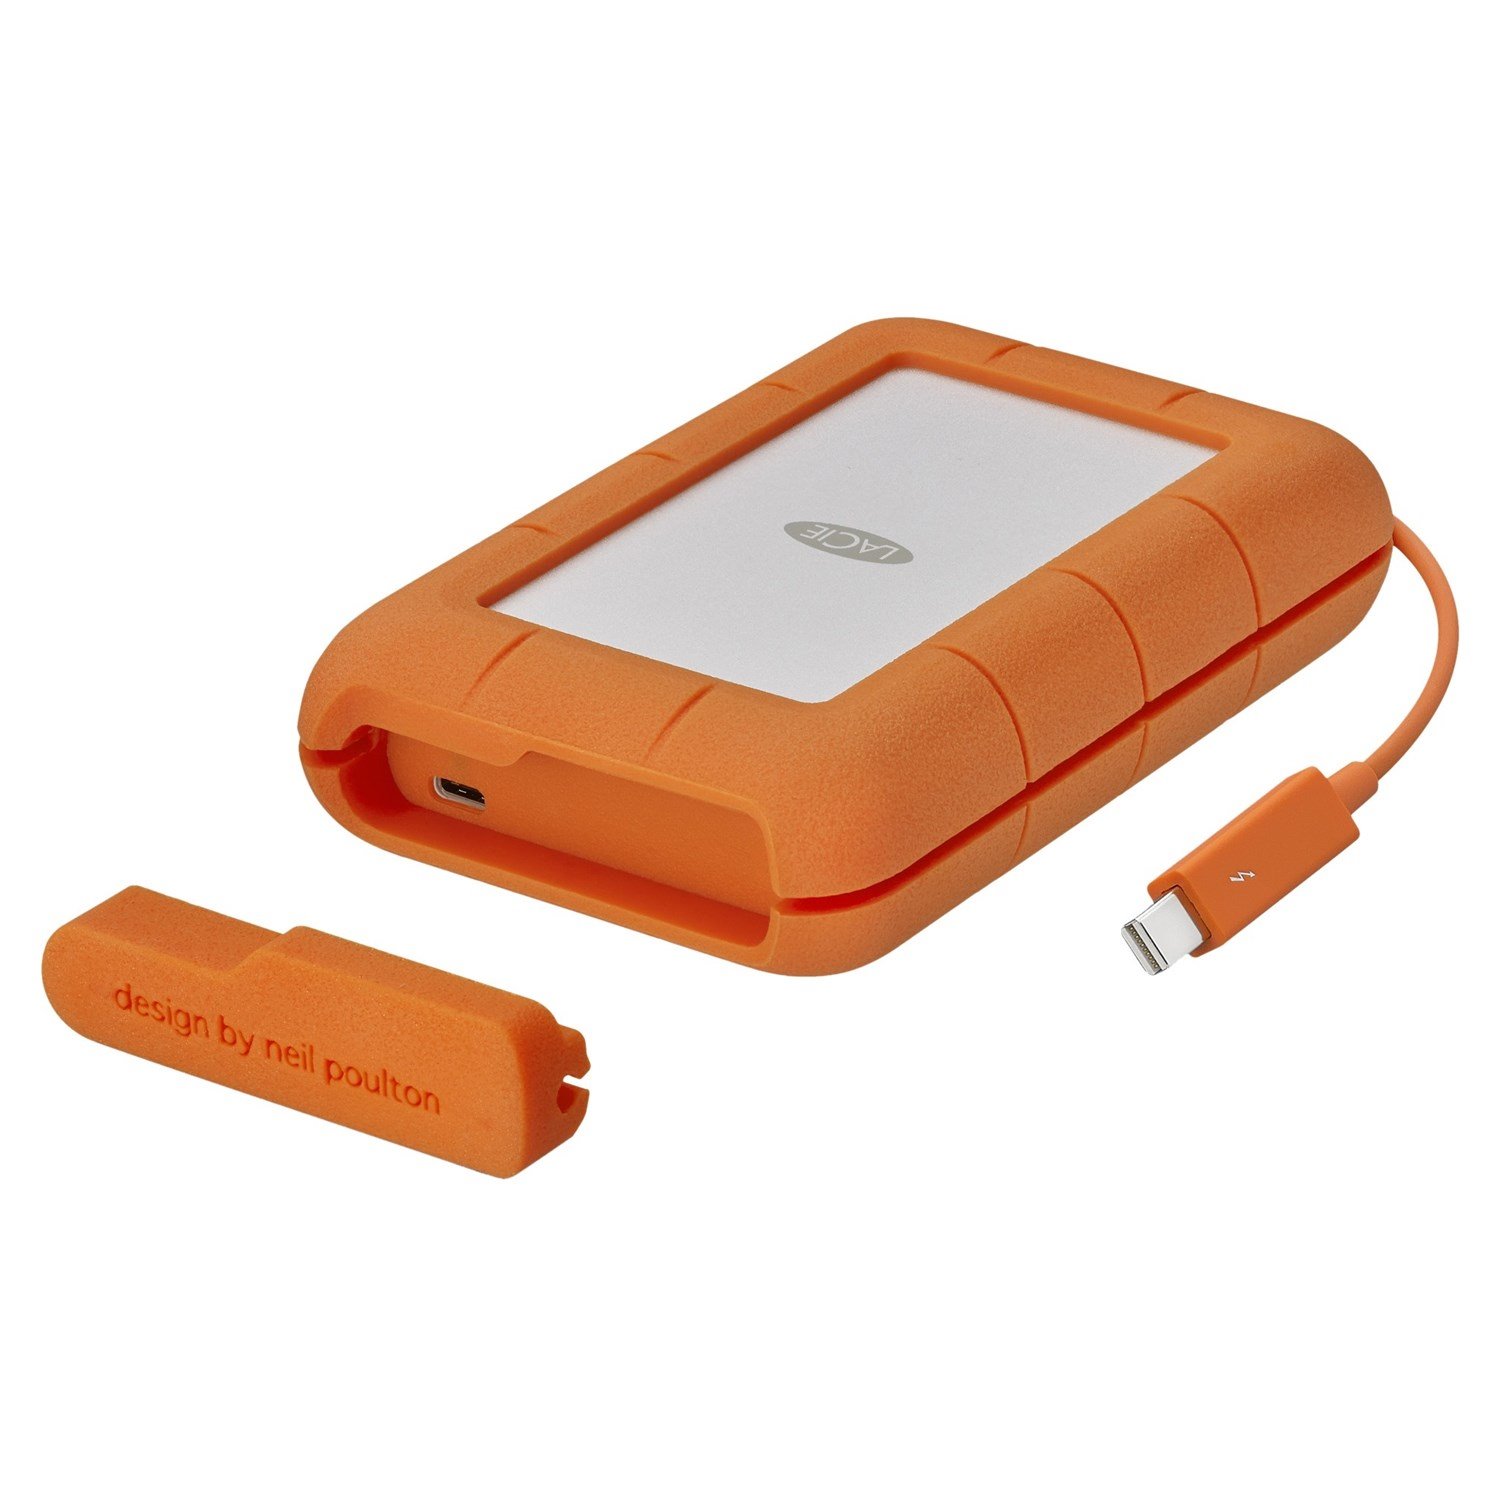 reformat lacie external hard drive for pc